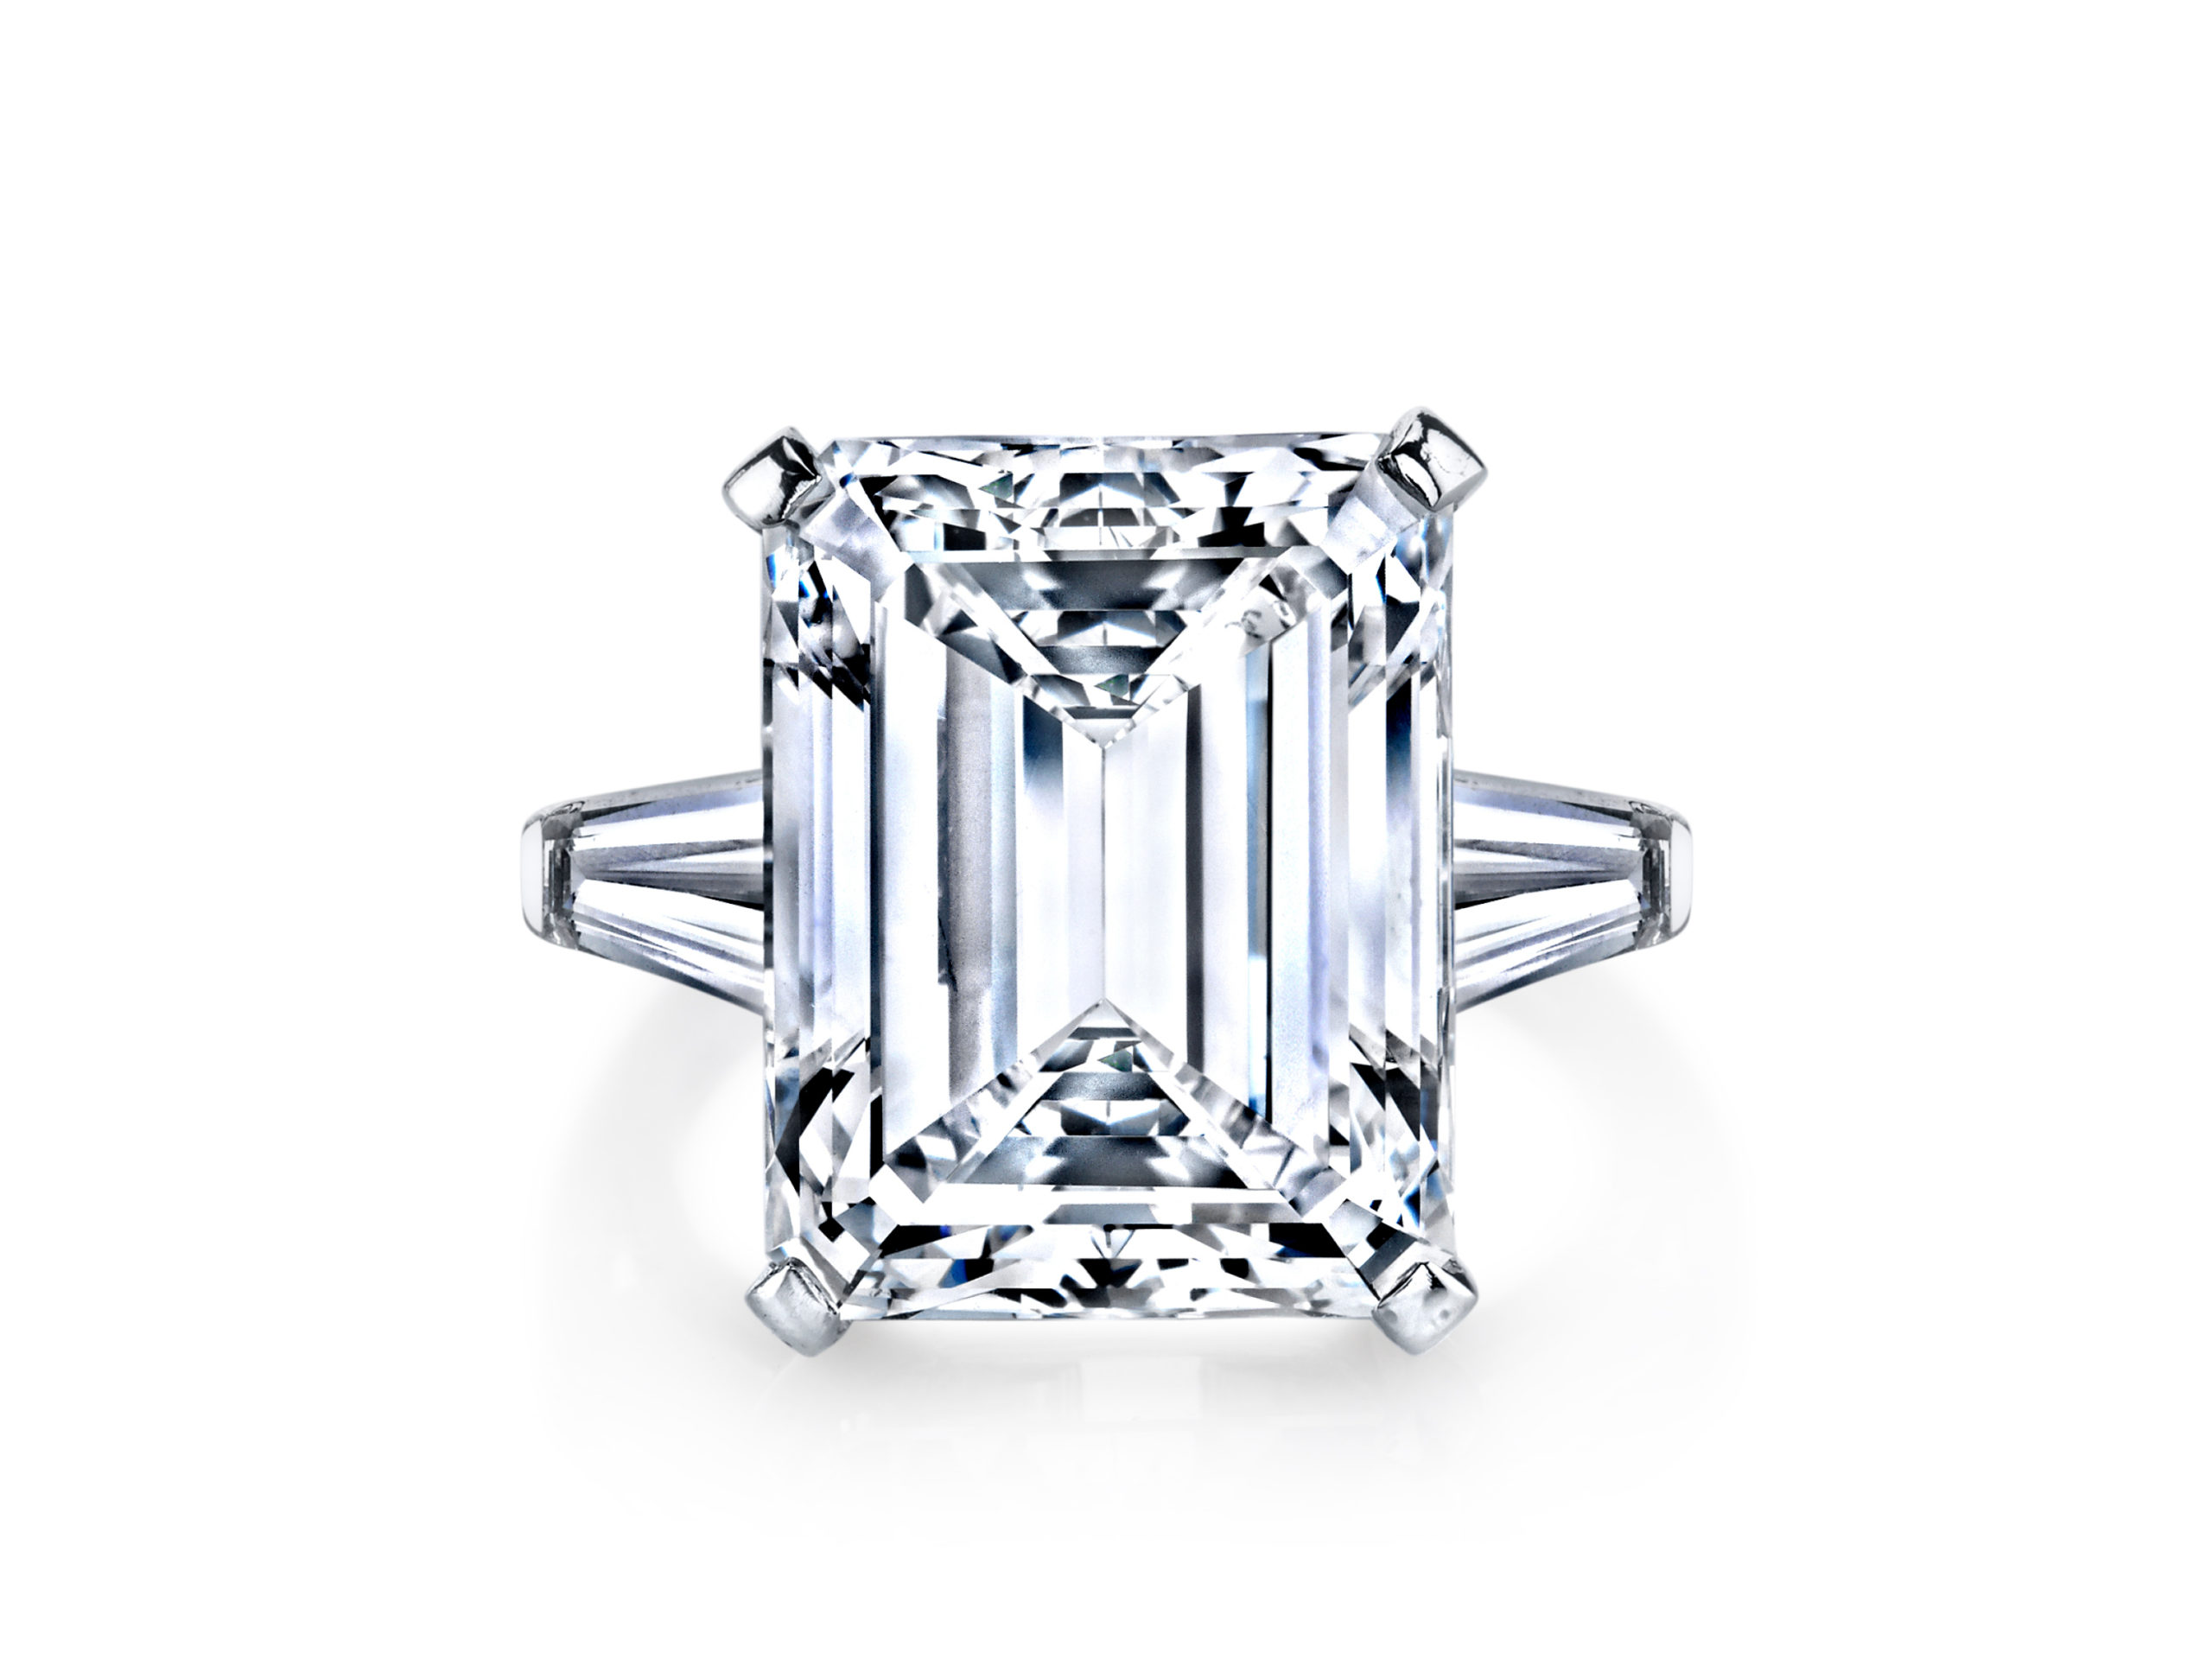 Crown Jewelers of Naples – We Treat You Like Royalty